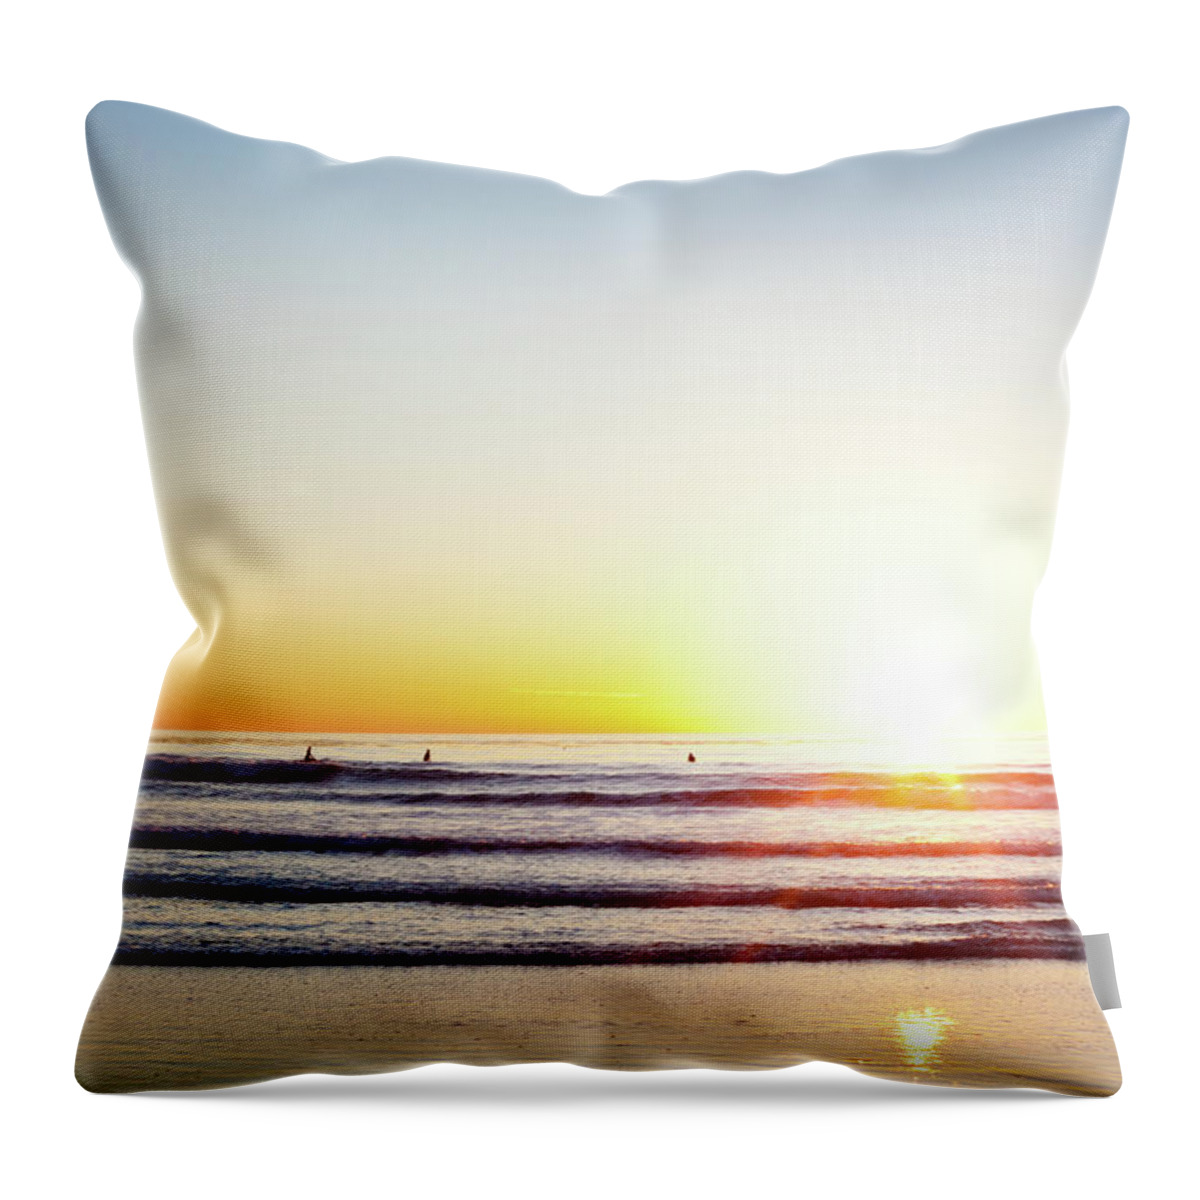 Orange Color Throw Pillow featuring the photograph Sunset Surfers by Ianmcdonnell